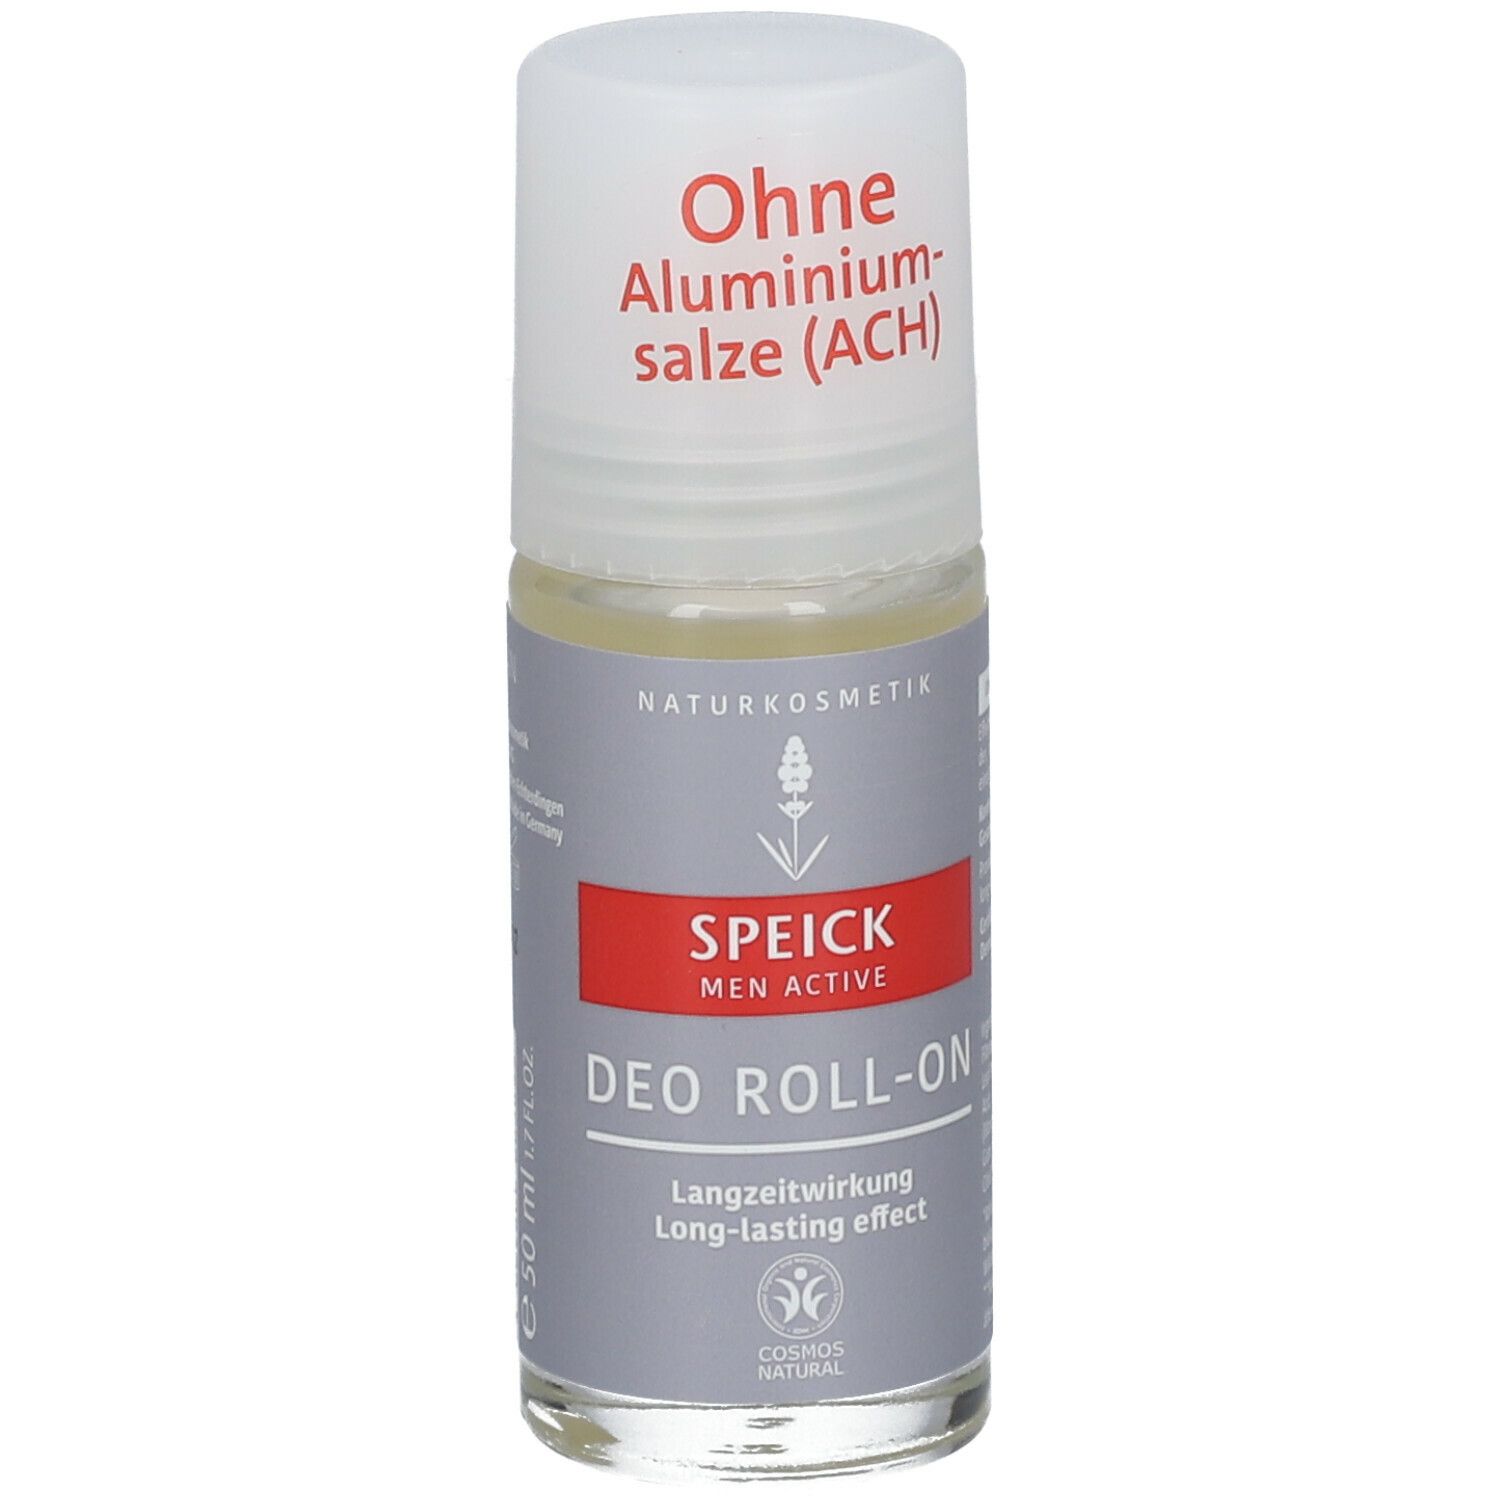 SPEICK Men Active Deo Roll-On